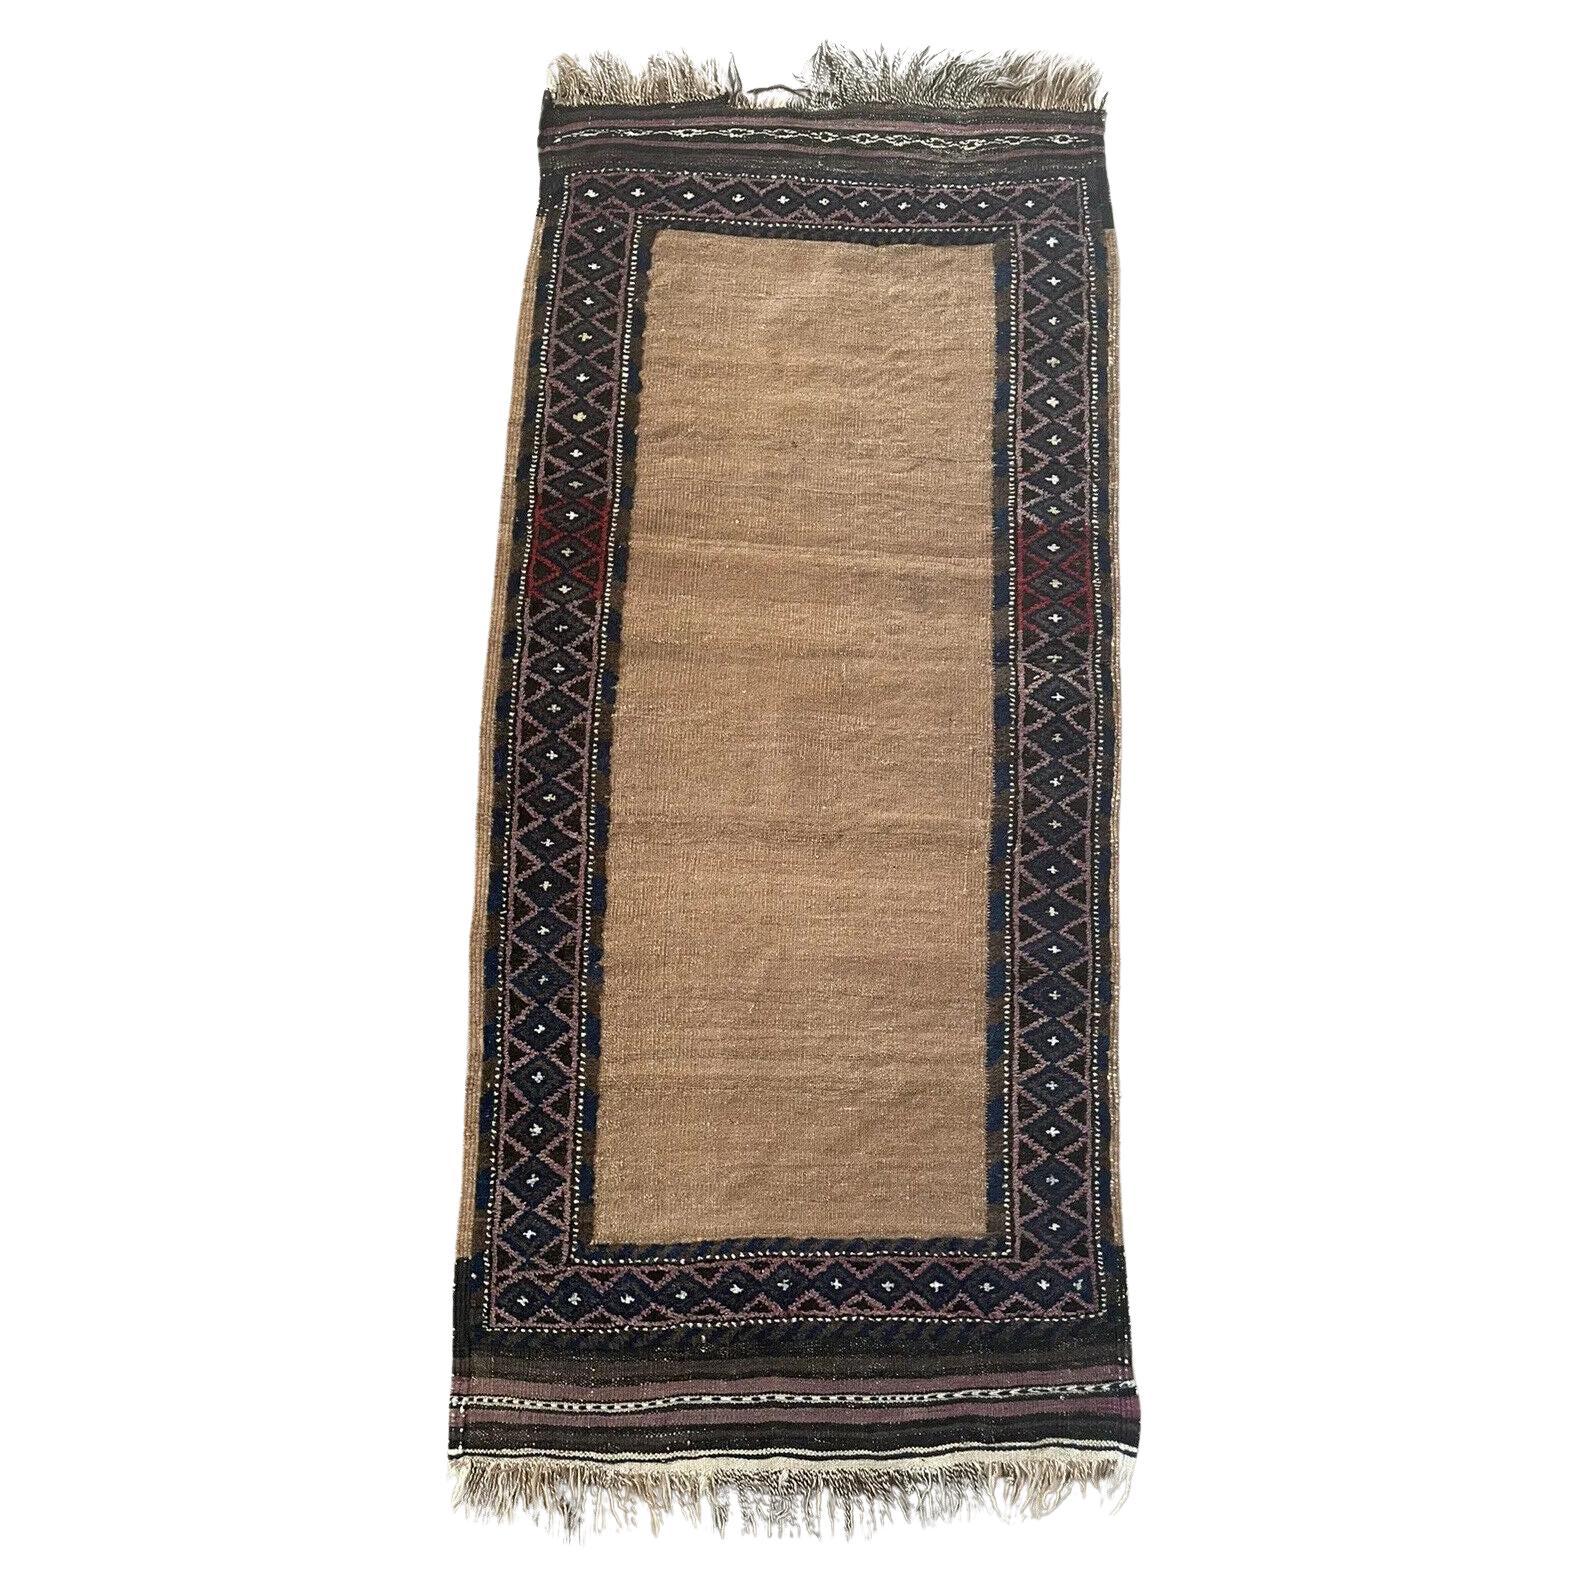 Handmade Antique Afghan Baluch Collectible Rug 2.3' x 5', 1920s - 1N12 For Sale